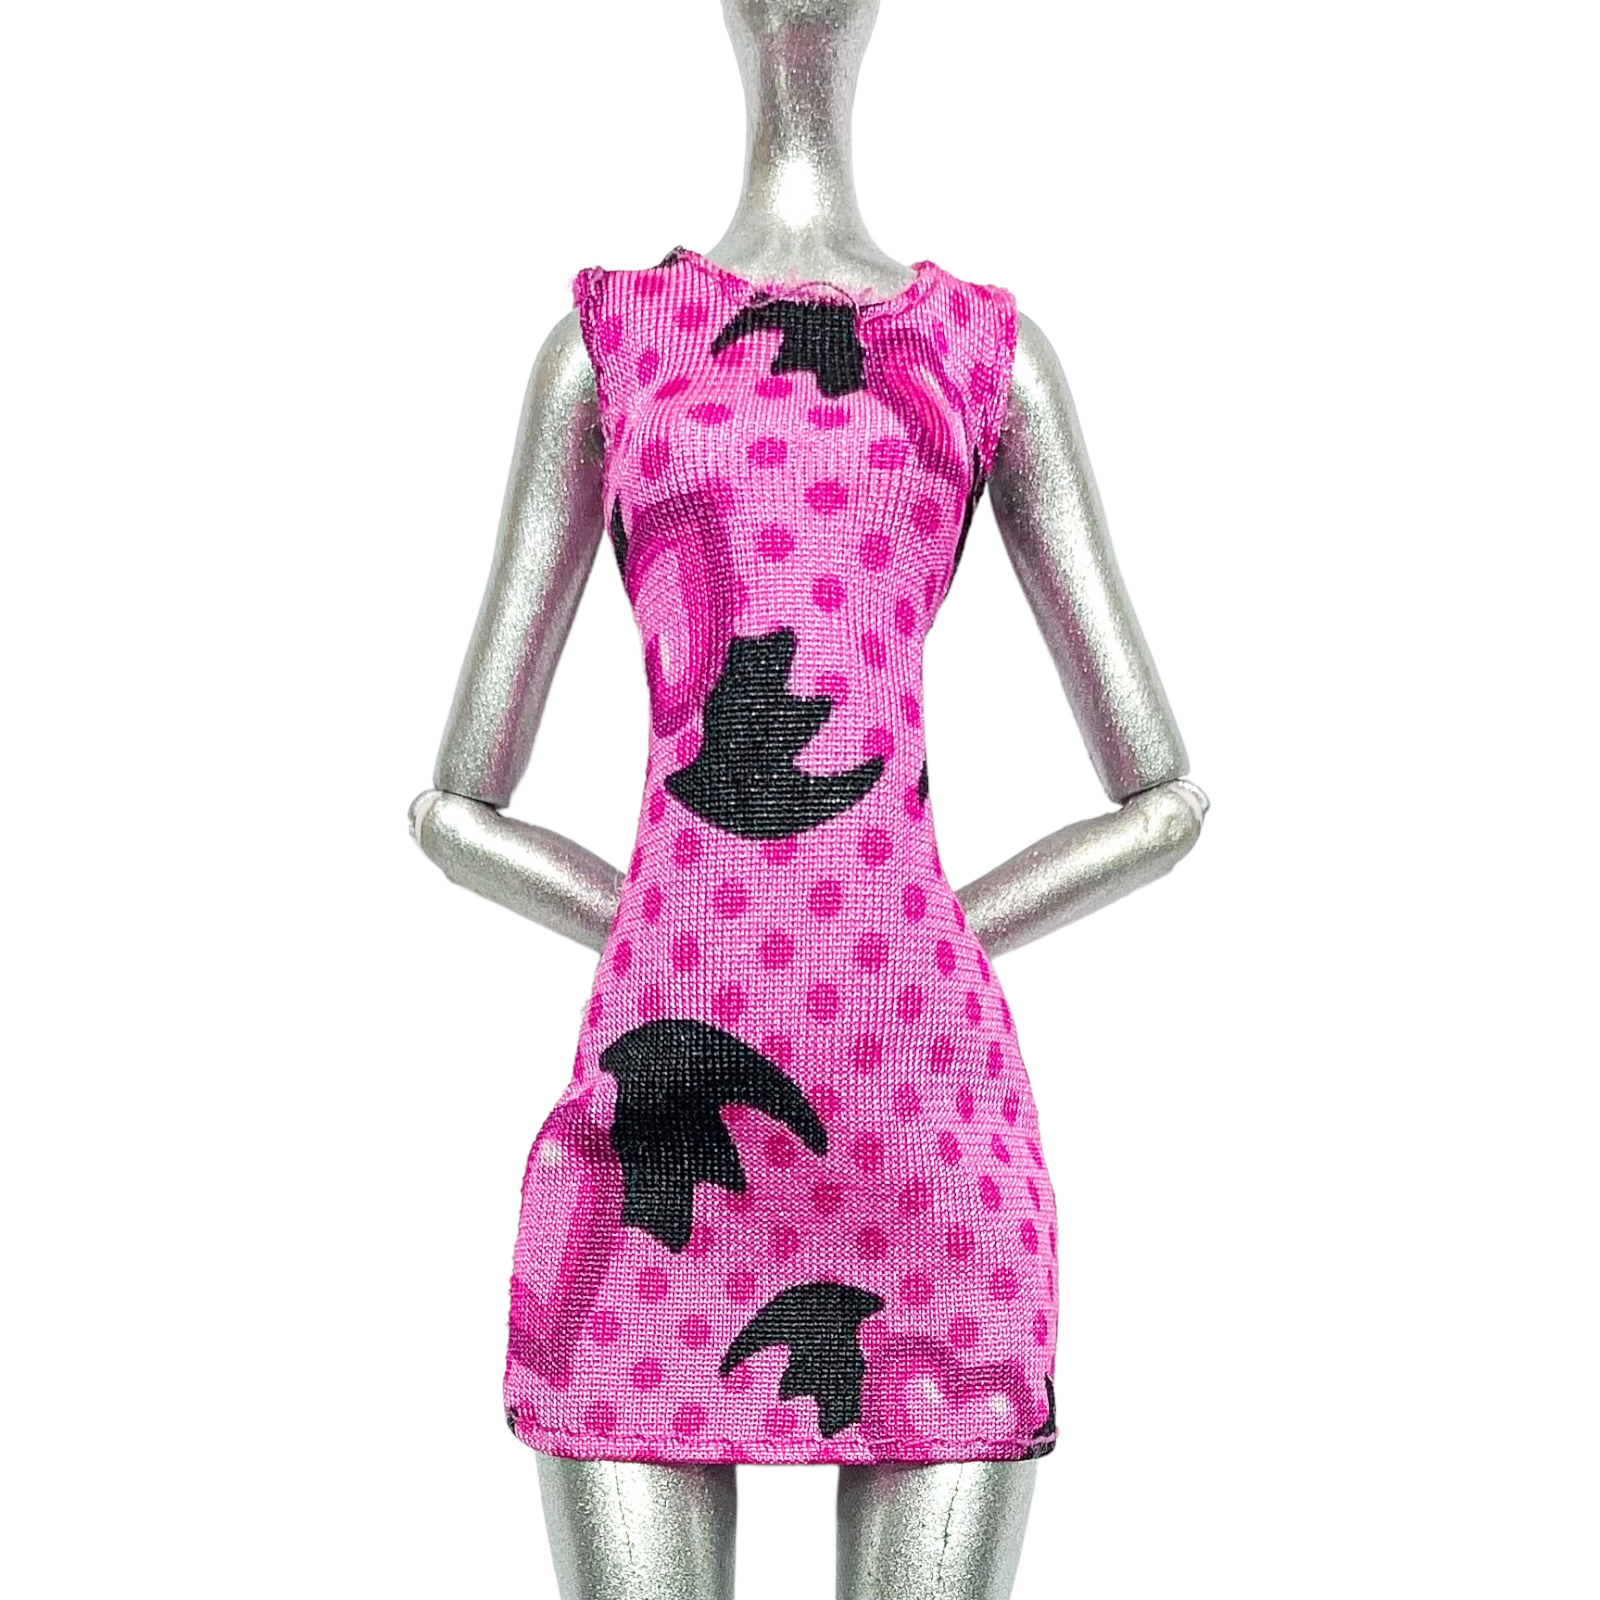 Monster High Draculocker Draculaura Doll Outfit Replacement Pink & Black Dress